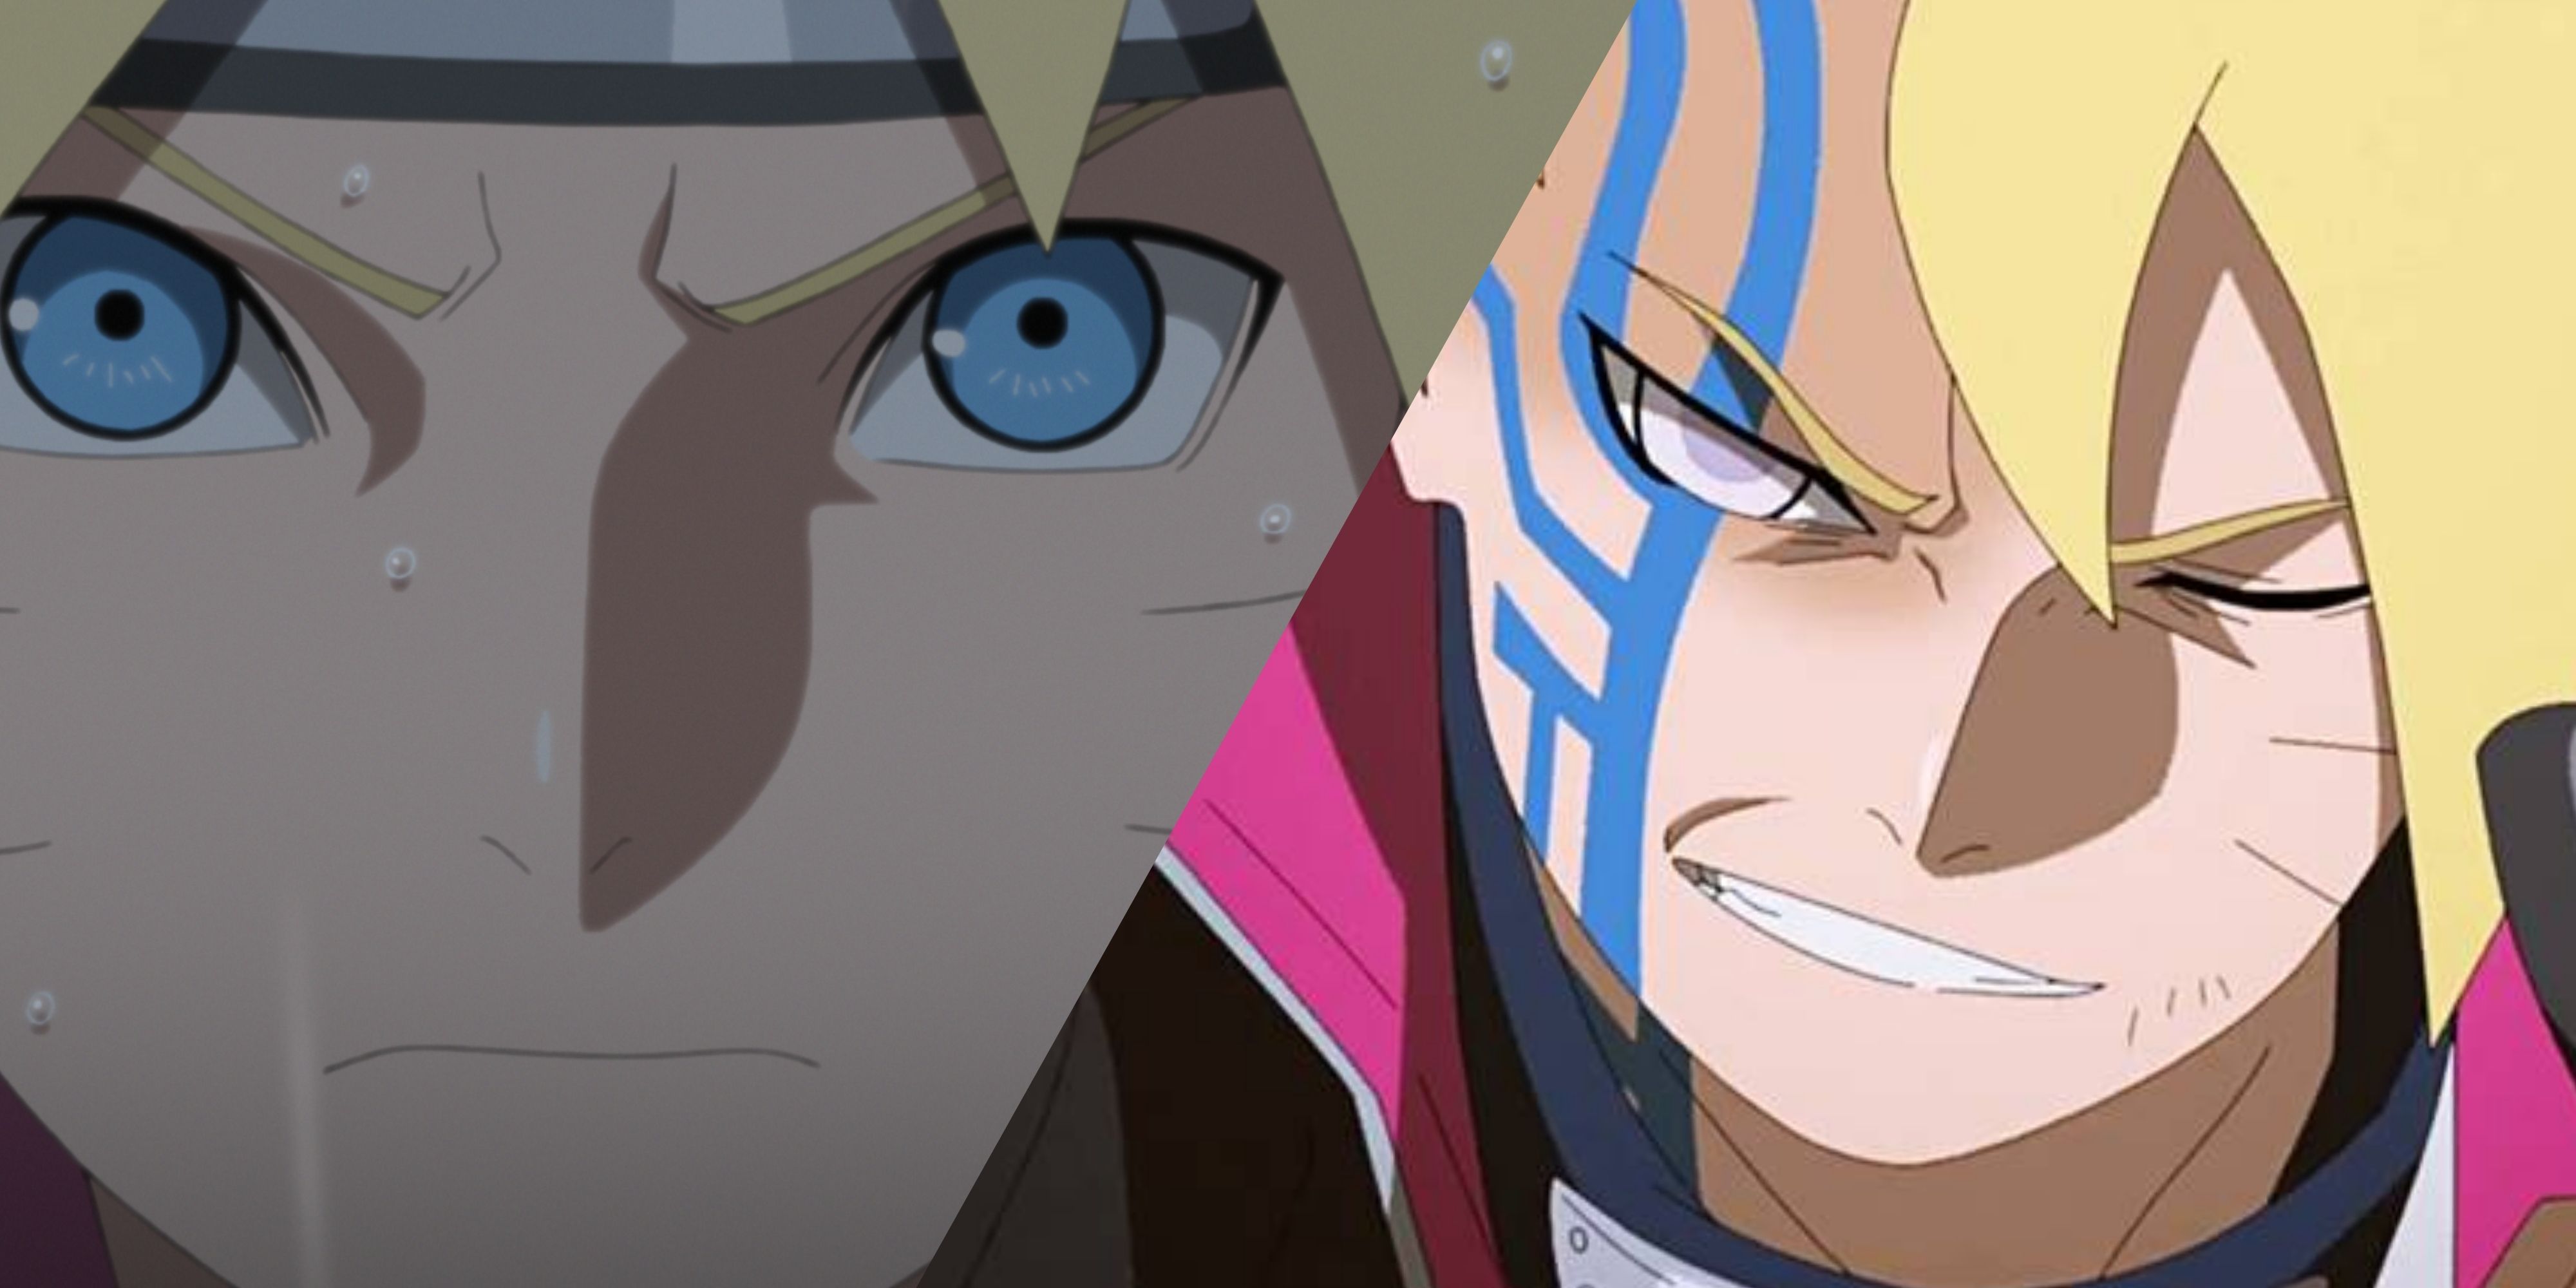 Why Is Boruto Uzumaki Hated By Fans?